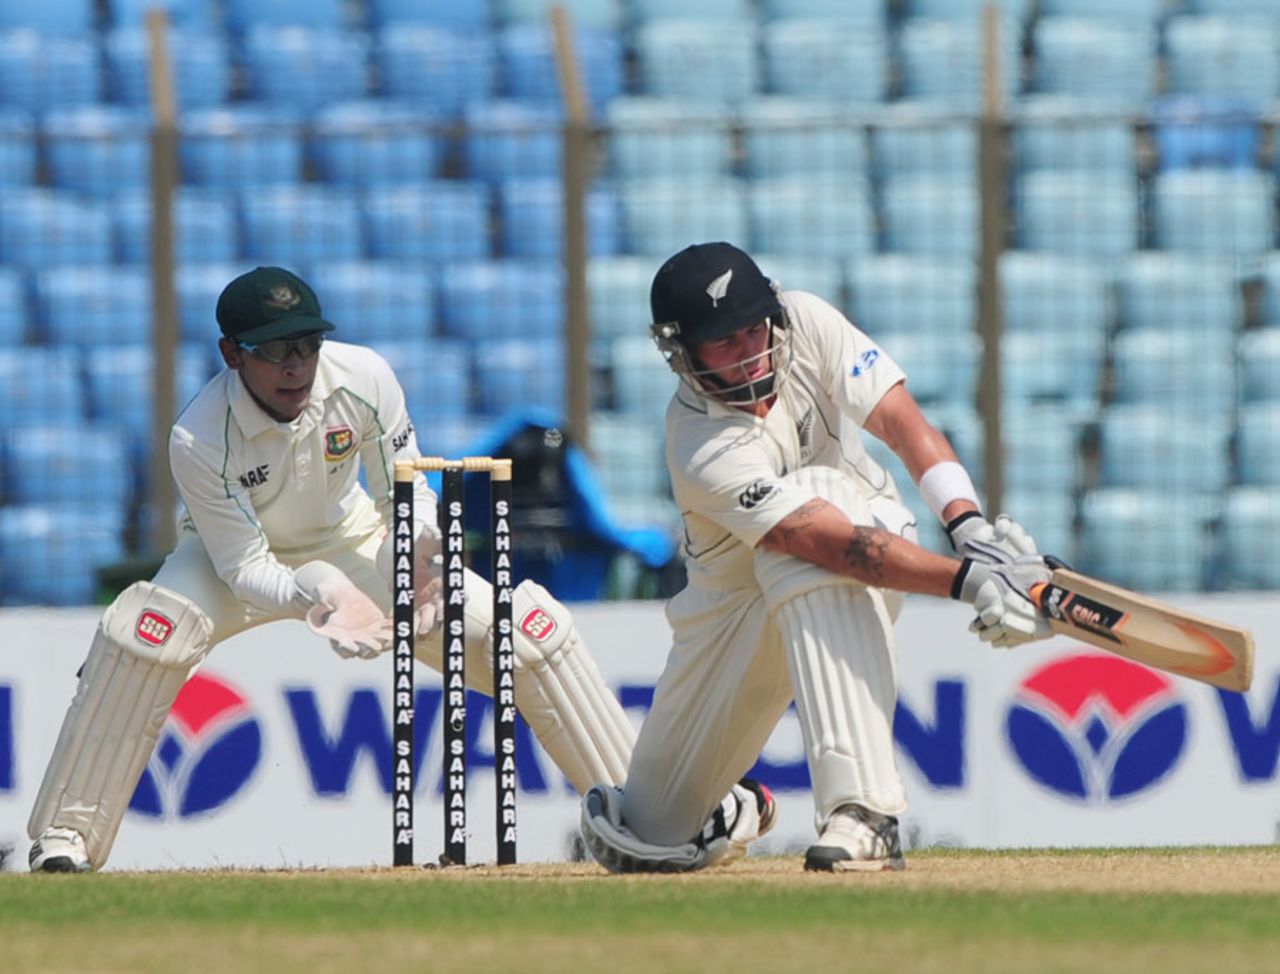 Doug Bracewell pulls out the sweep shot, Bangladesh v New Zealand, 1st Test, Chittagong, day 2, October 10, 2013